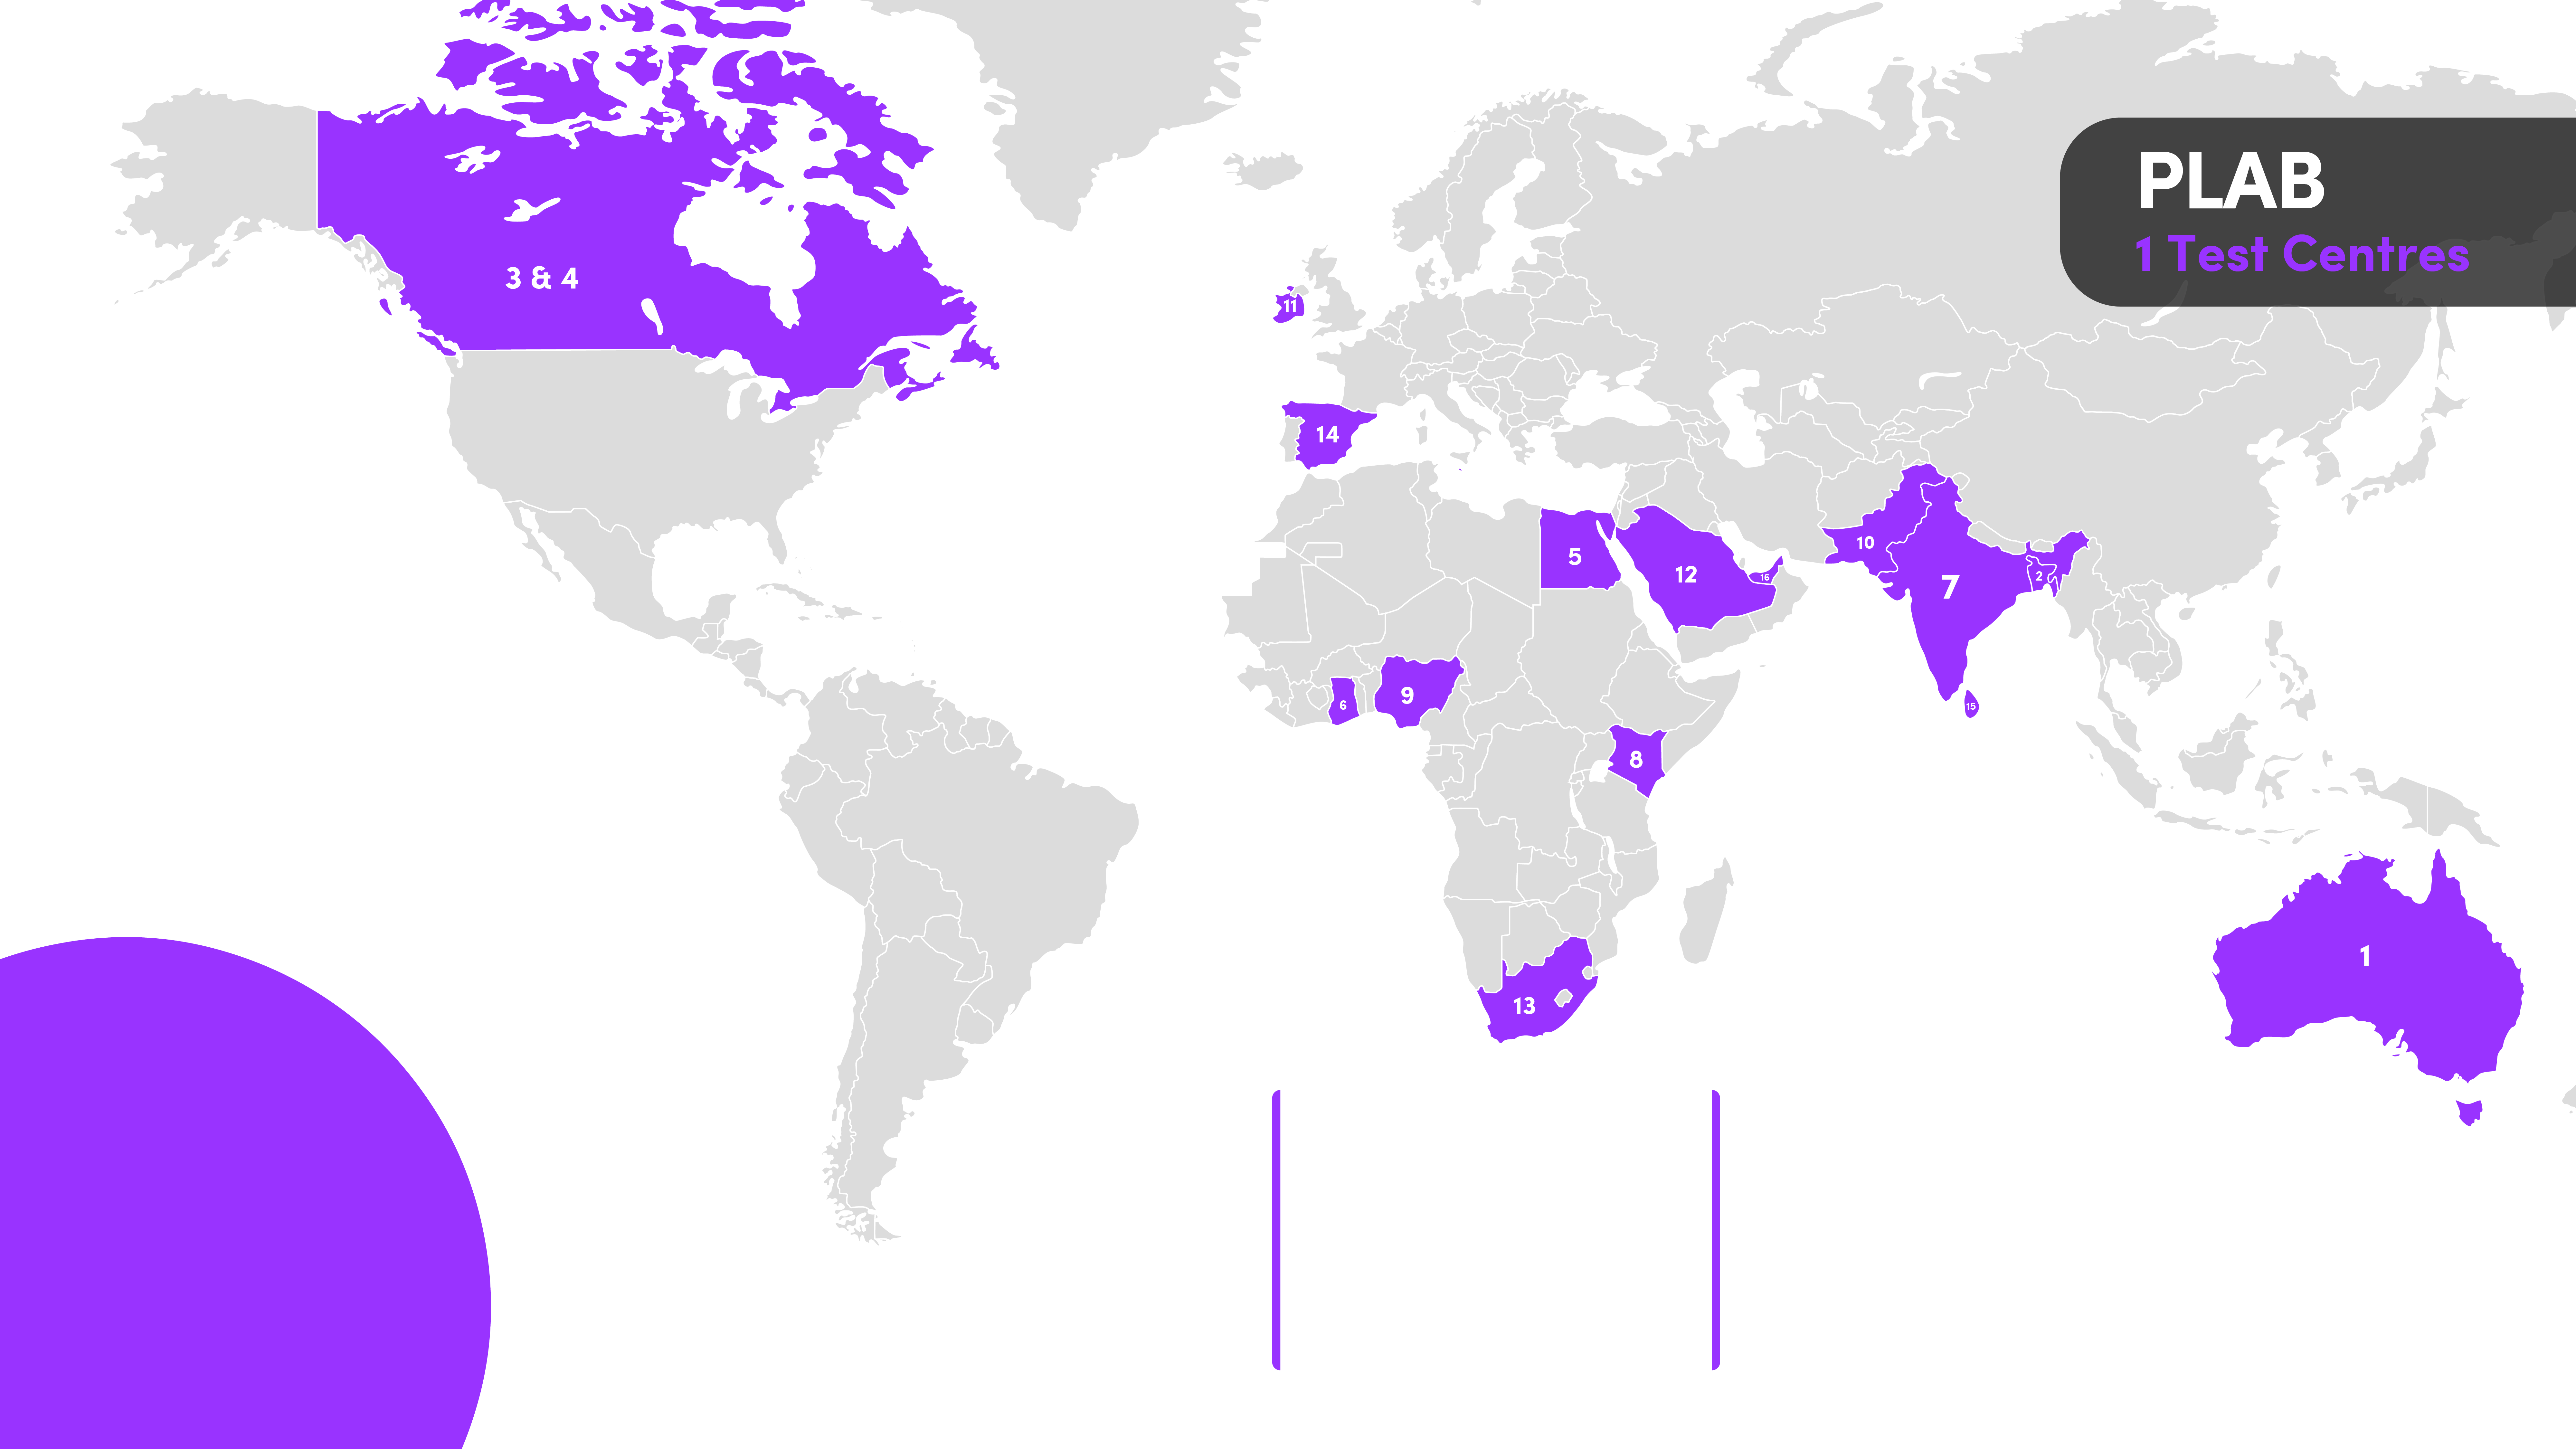 Map depicting the locations of the worldwide PLAB1 test centres